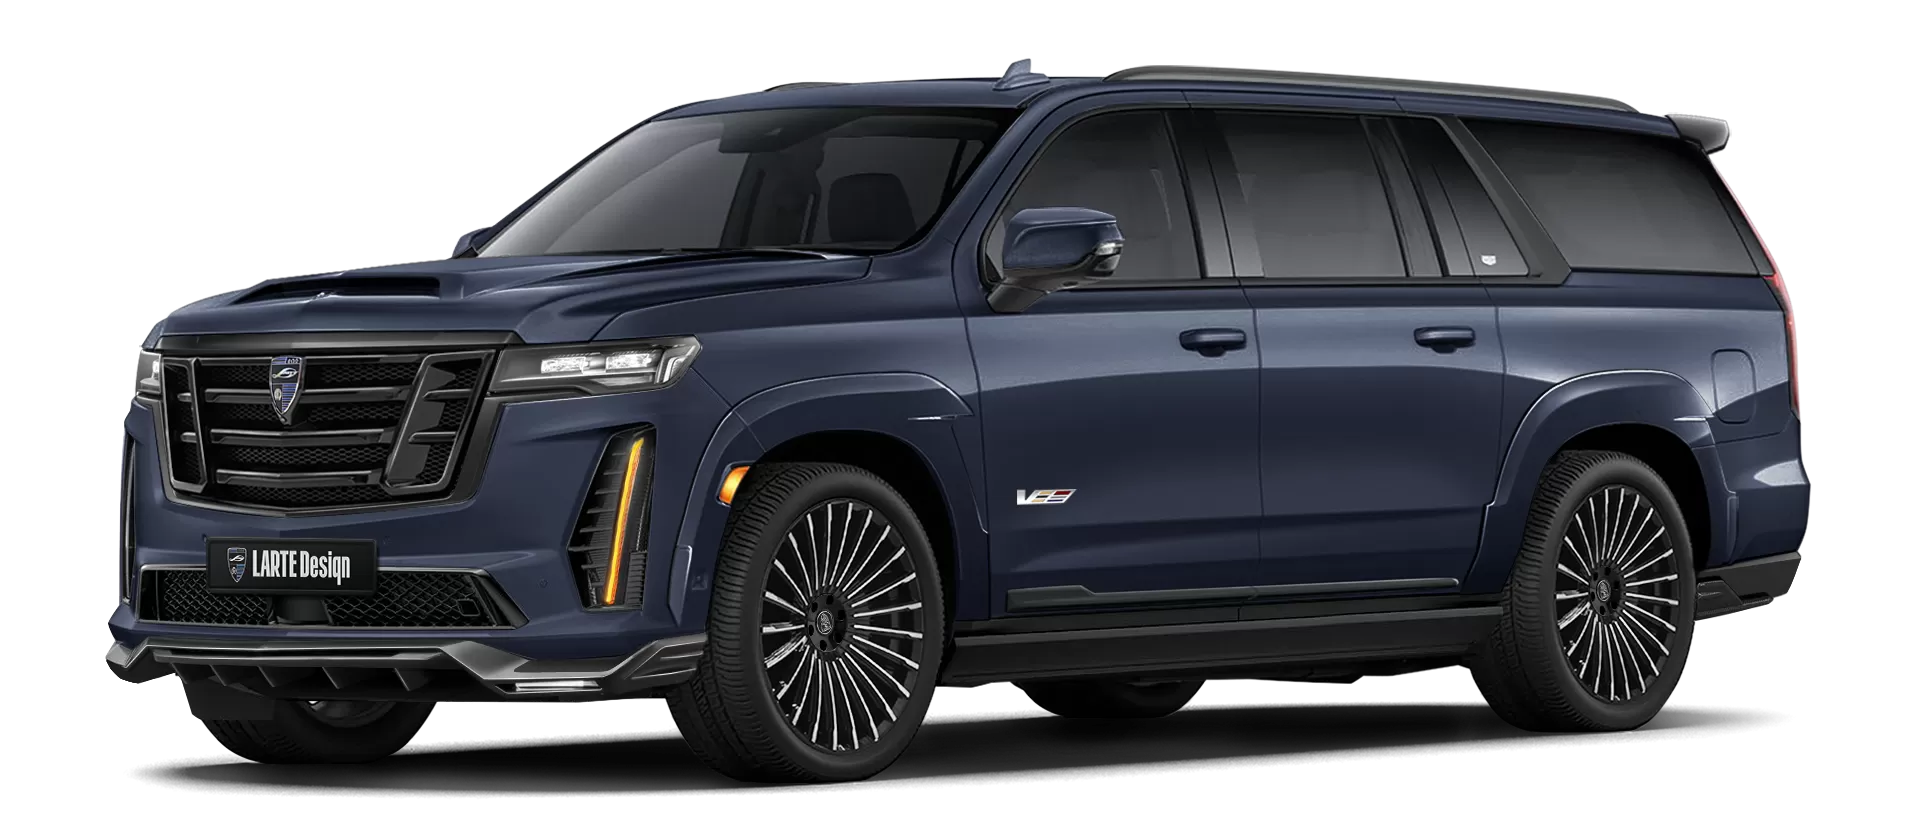 Cadillac Escalade-V / V-ESV with painted body kit: front view shown in Dark Moon Blue